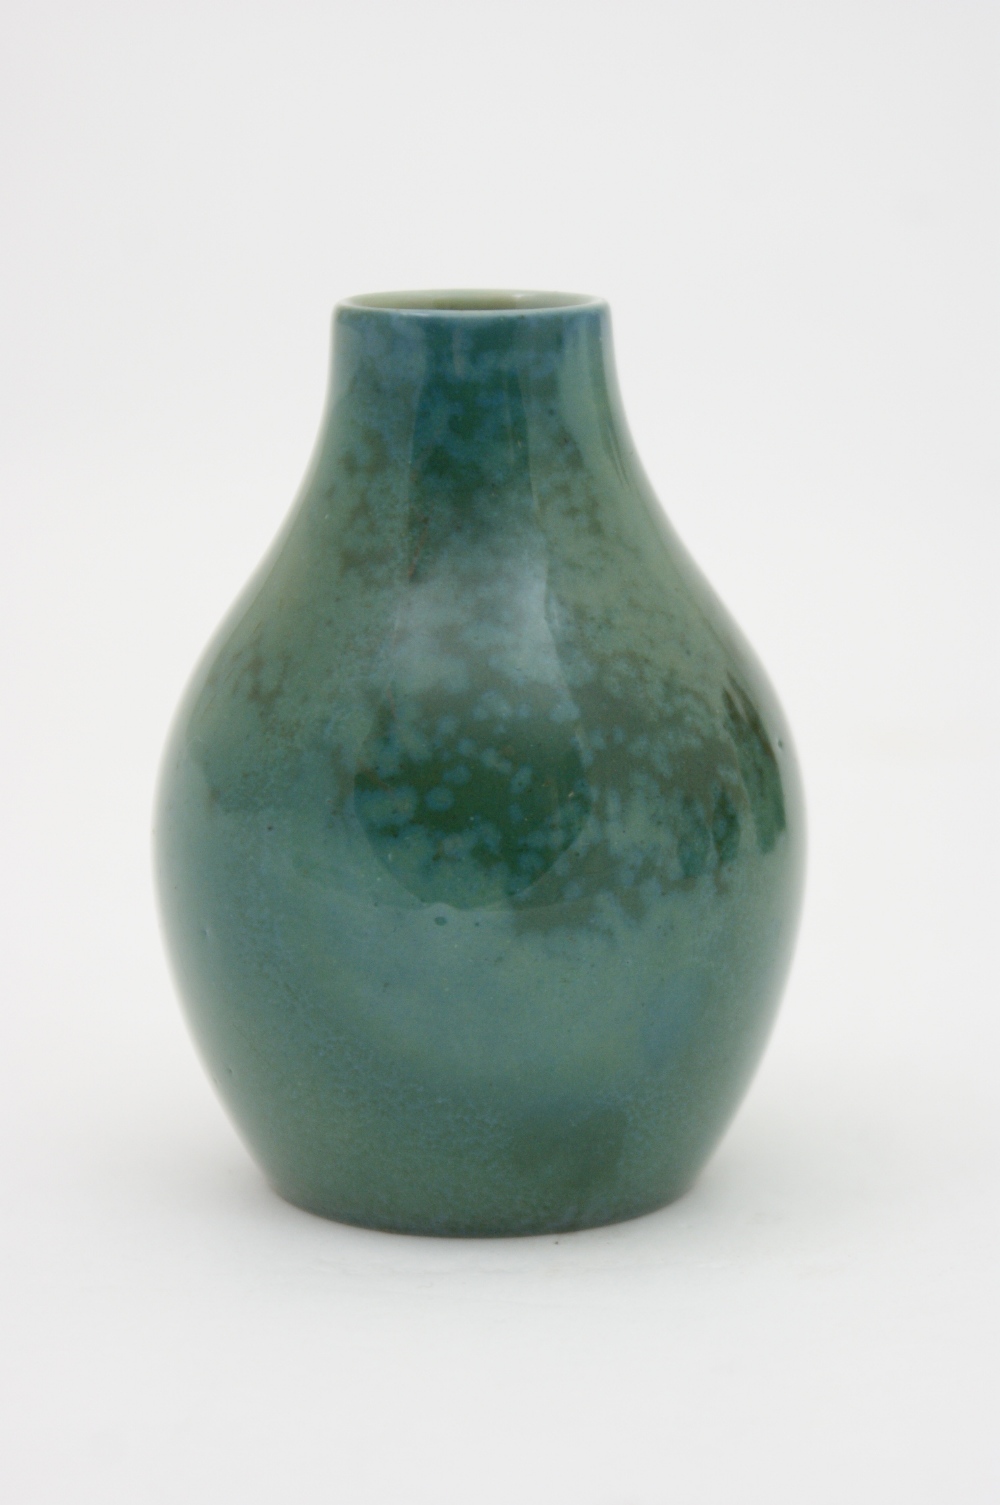 Royal Doulton titanian small vase, ovoid form decorated with a green-blue crystalline glaze, printed